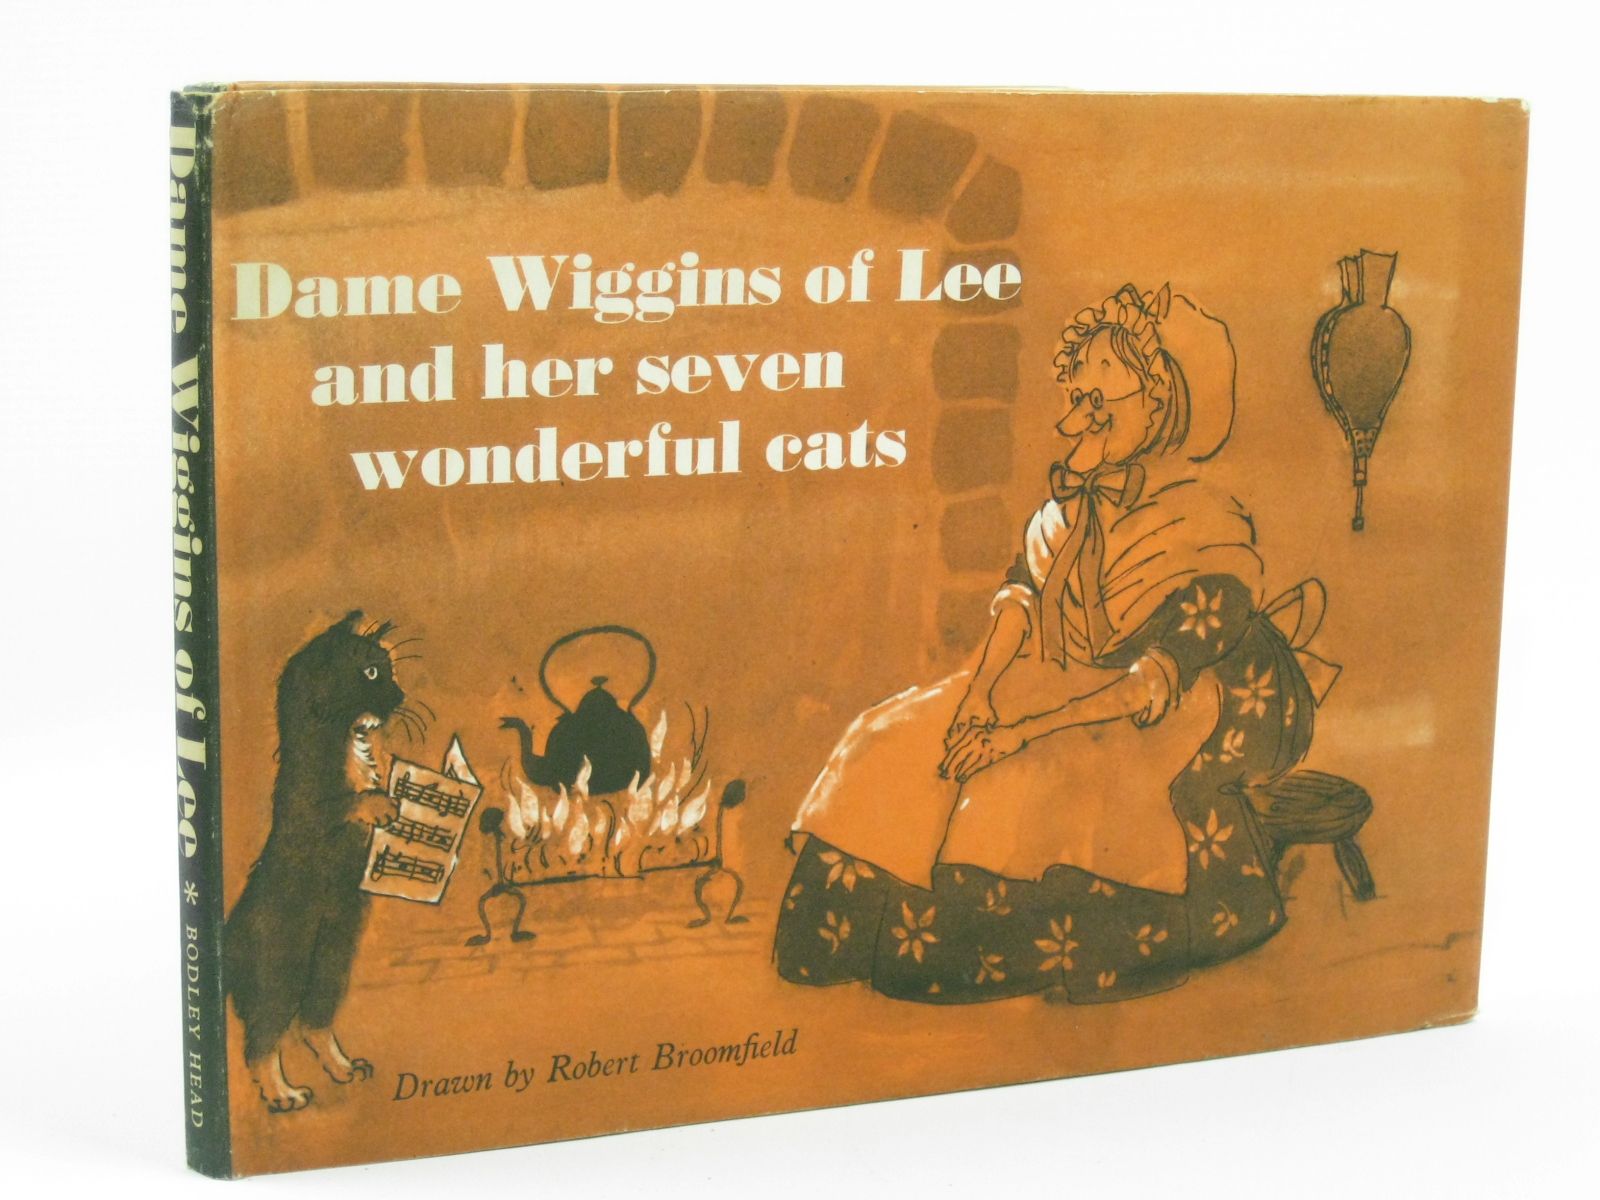 Photo of DAME WIGGINS OF LEE AND HER SEVEN WONDERFUL CATS written by Ruskin, John illustrated by Broomfield, Robert published by The Bodley Head (STOCK CODE: 1506506)  for sale by Stella & Rose's Books